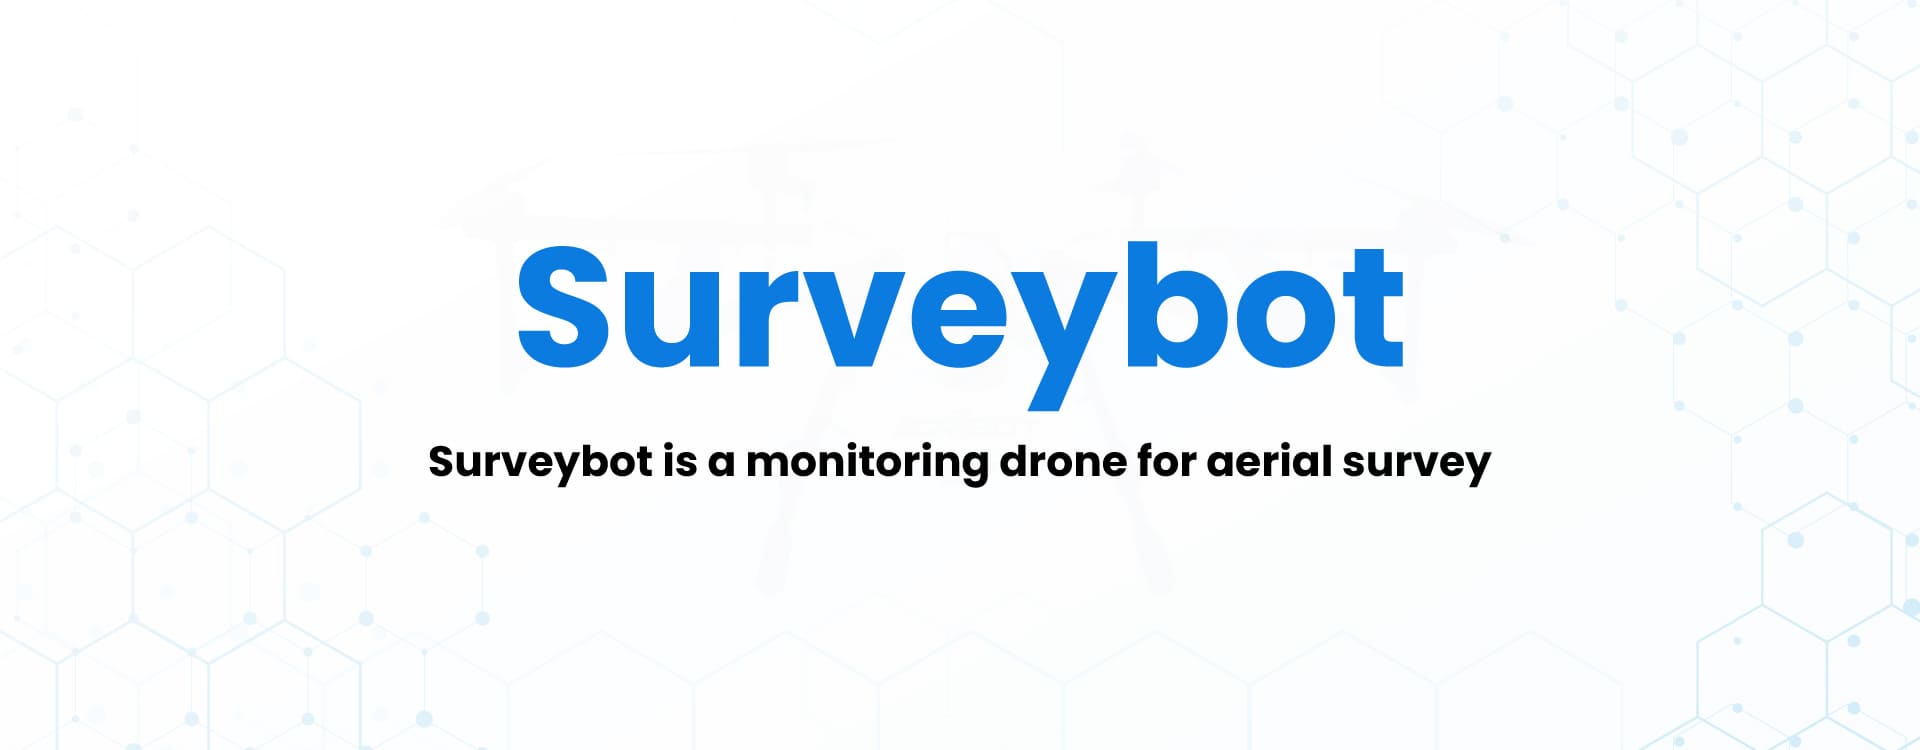 Surveybot is a monitoring drone for aerial survey